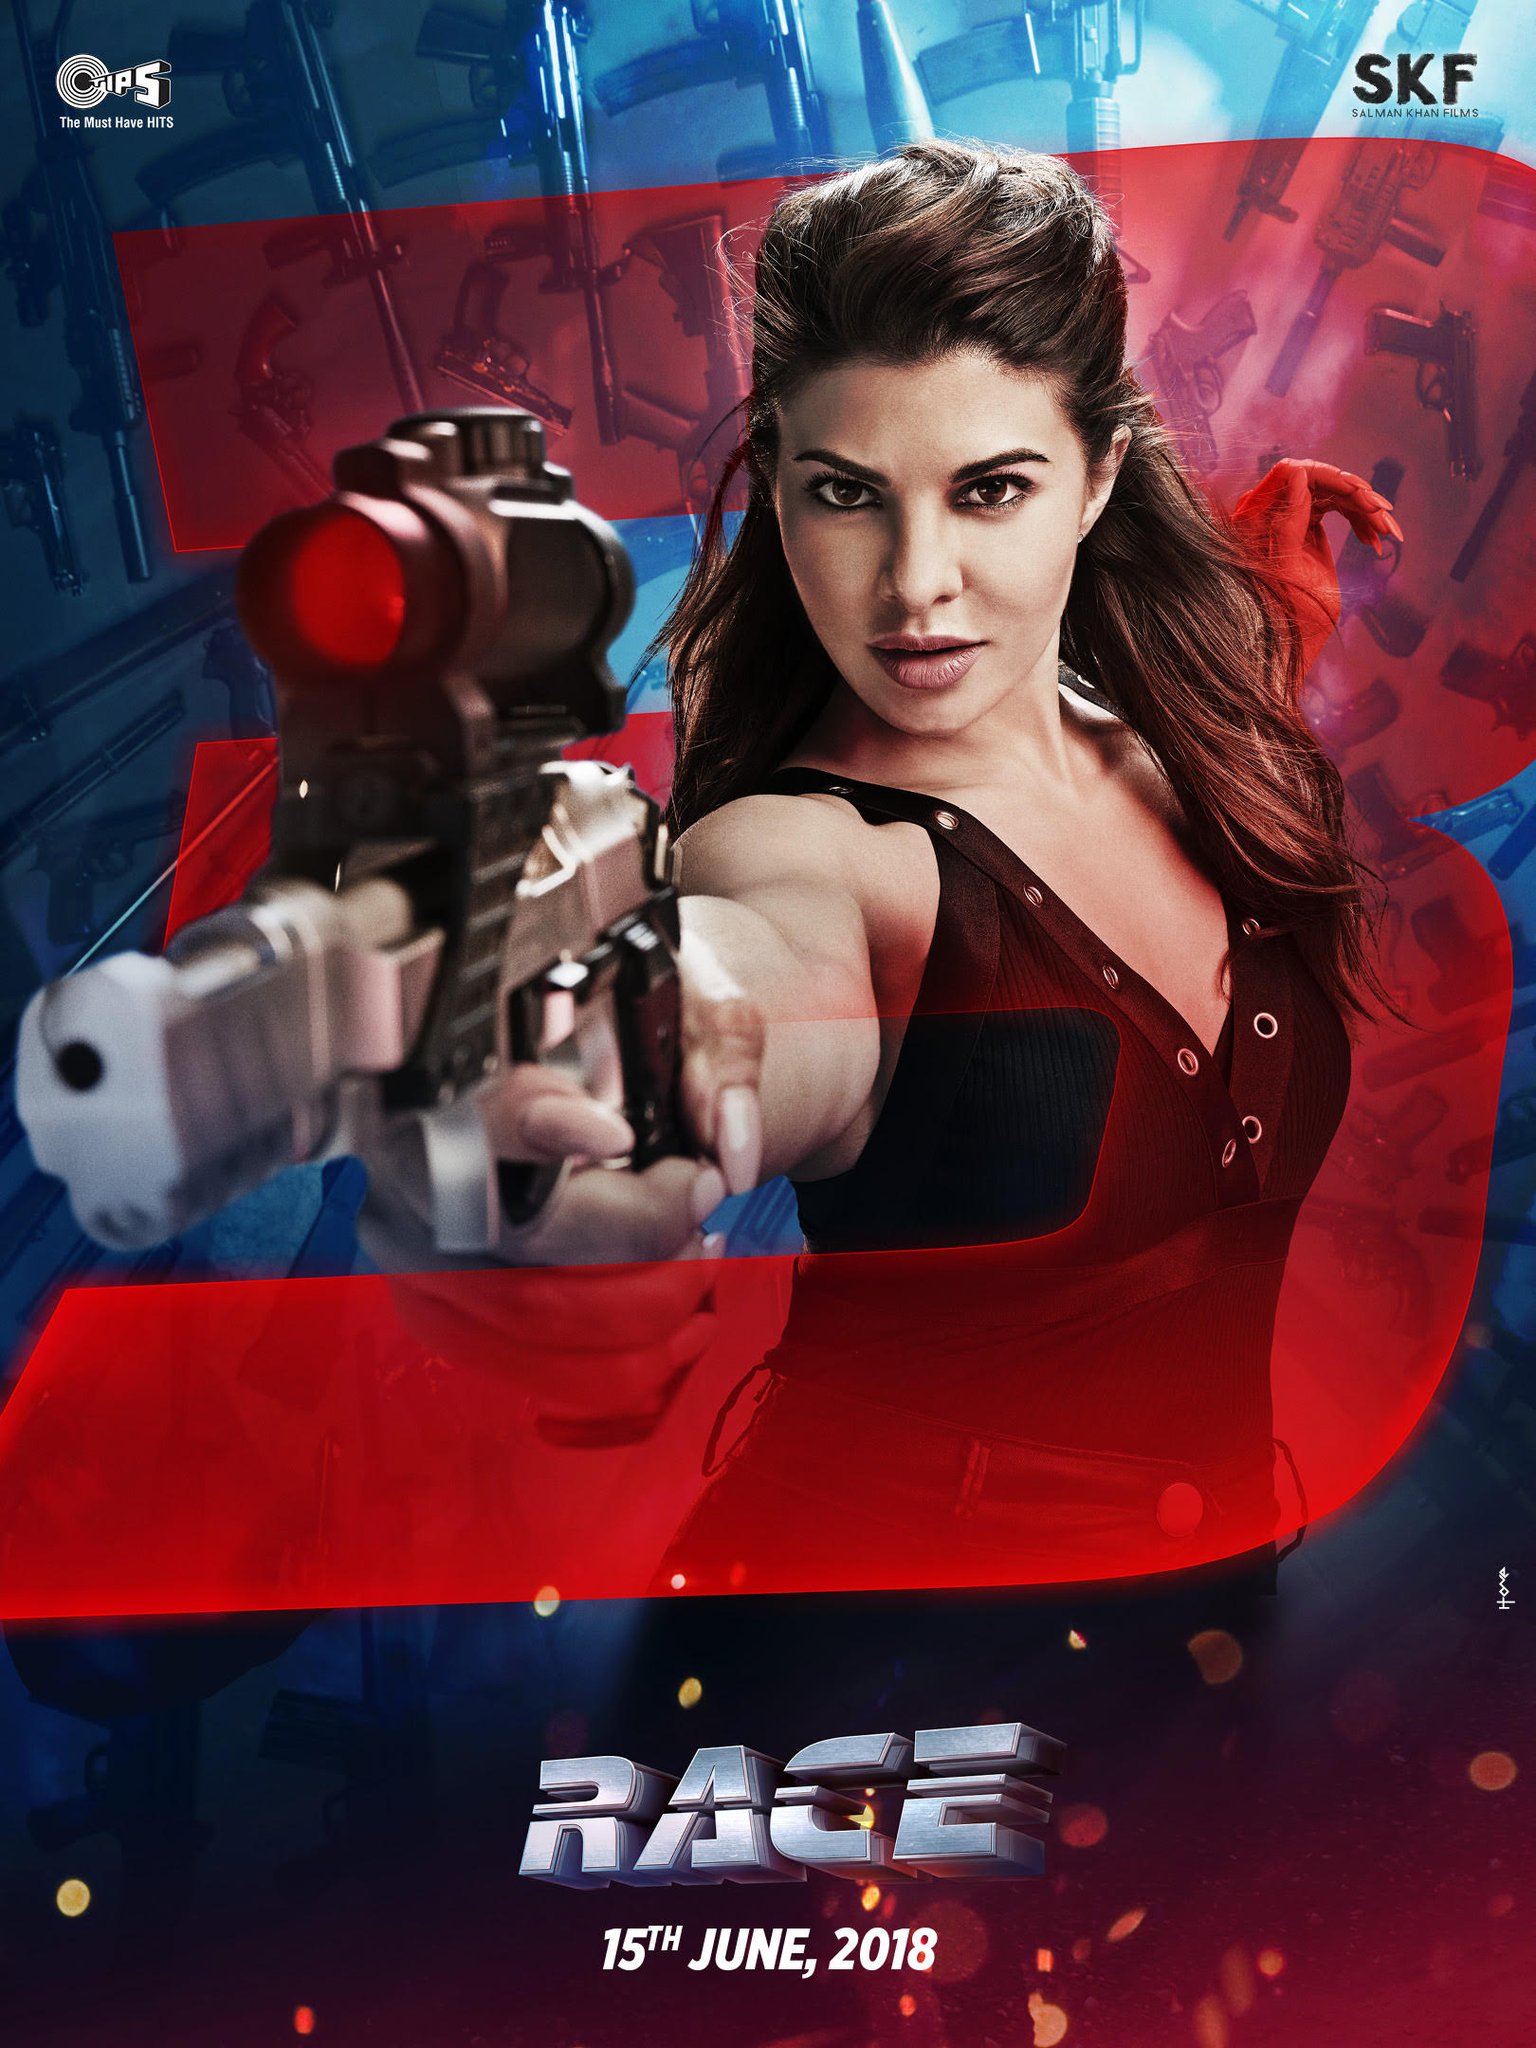 Jacqueline Fernandez as Jessica - Raw Power - Race 3 first look Poster